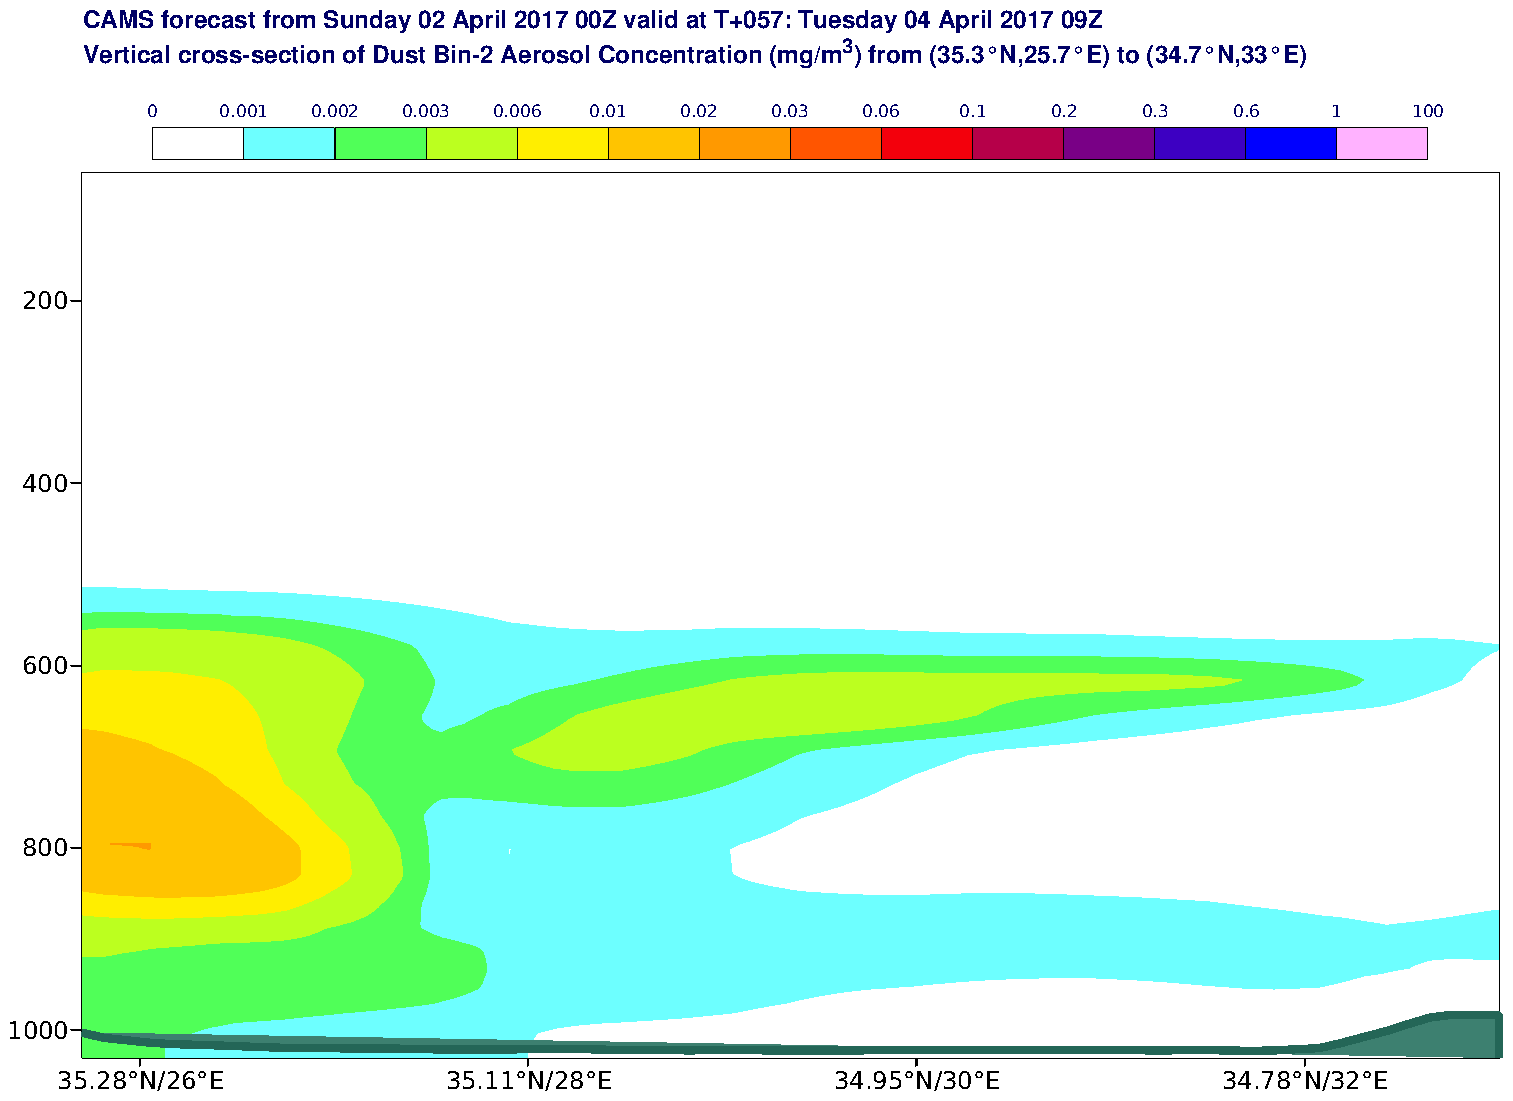 Vertical cross-section of Dust Bin-2 Aerosol Concentration (mg/m3) valid at T57 - 2017-04-04 09:00